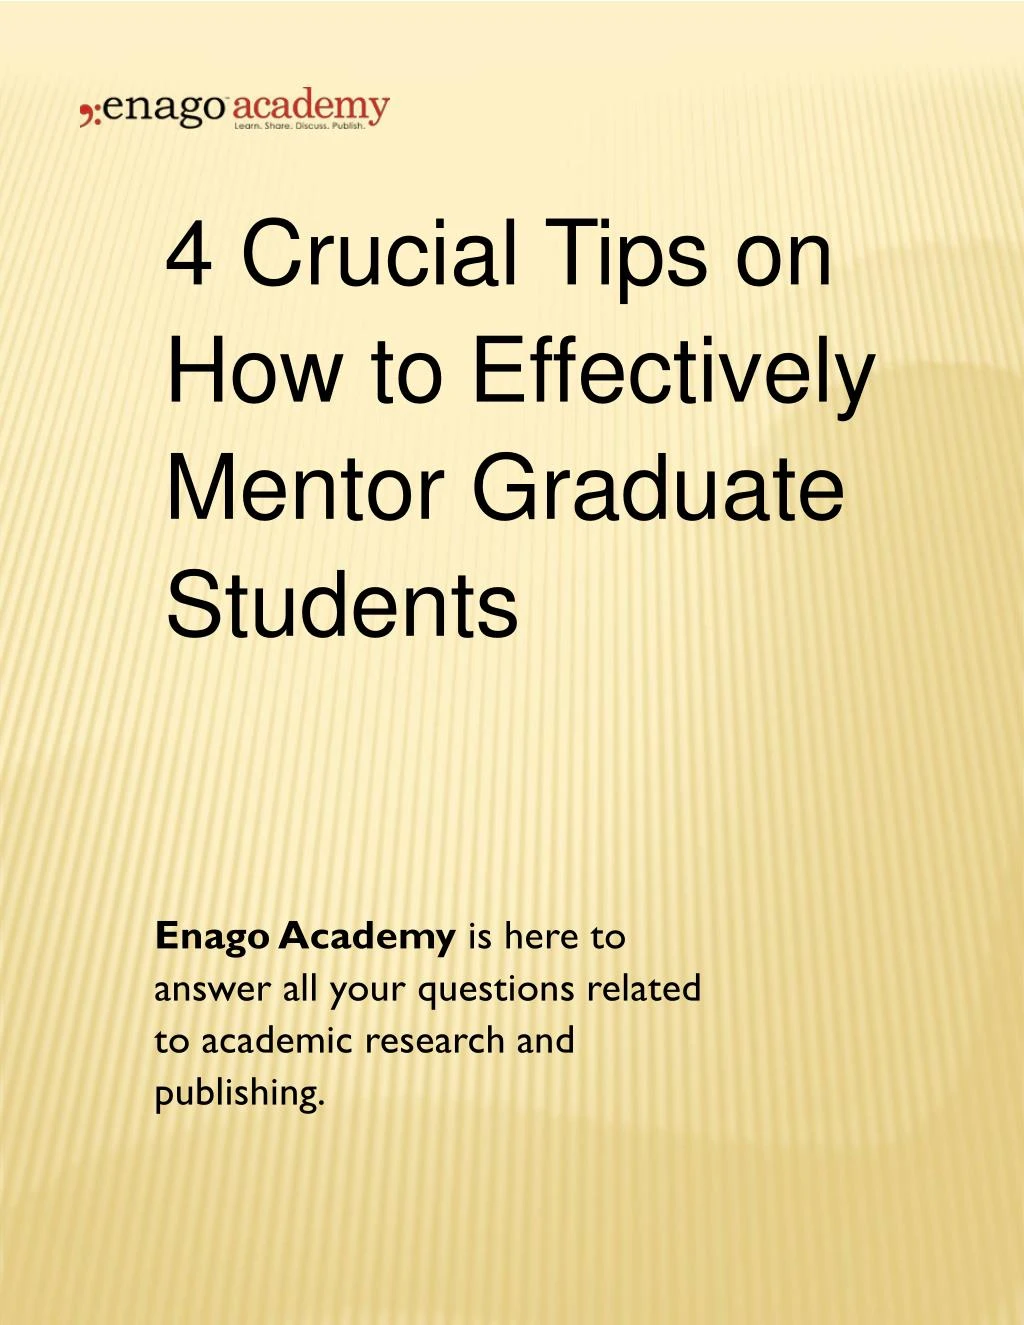 4 crucial tips on how to effectively mentor